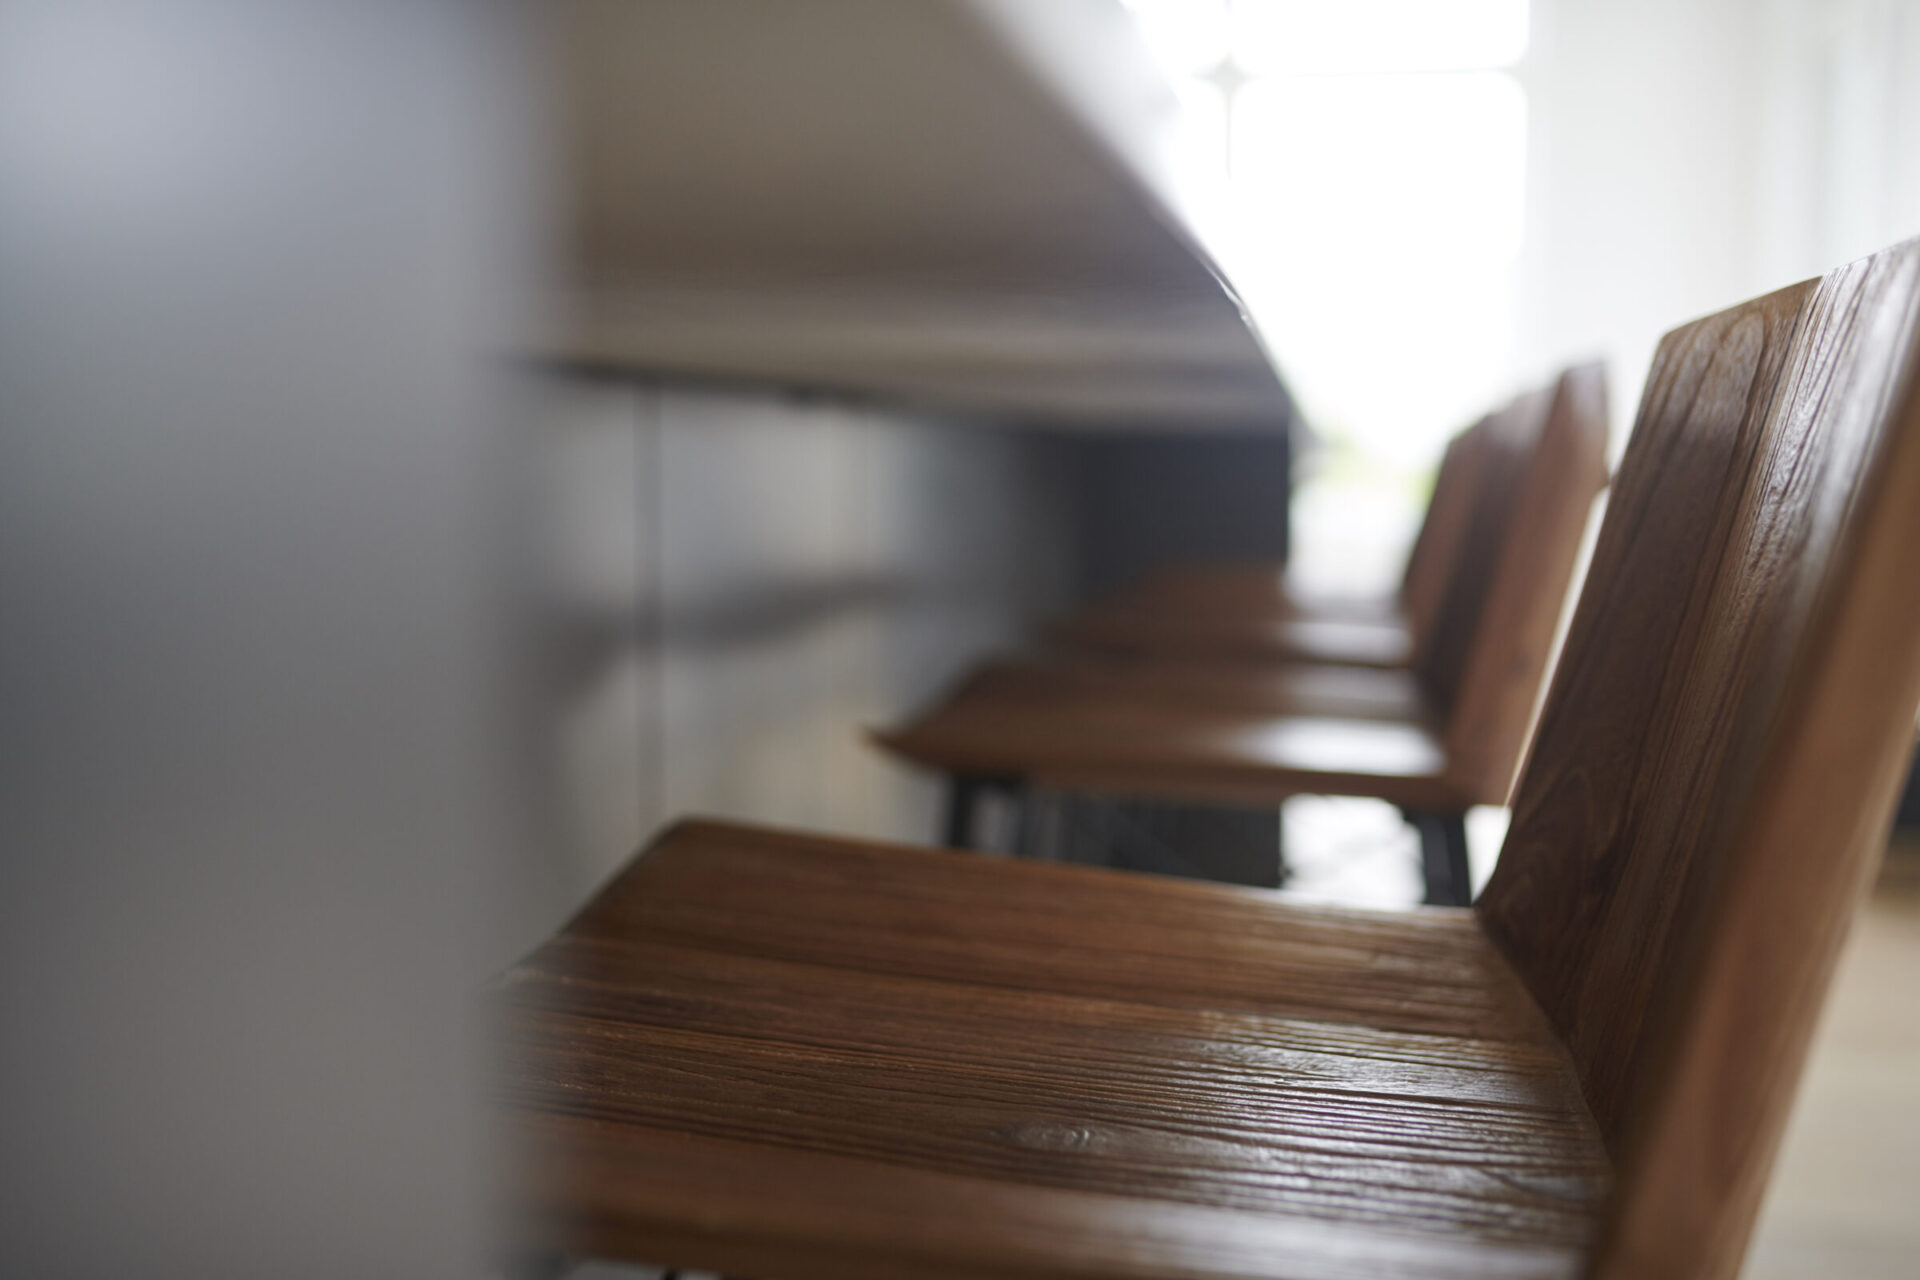 A row of wooden chairs against a white wall with focused lighting; a shallow depth of field blurs the background, highlighting texture and form.